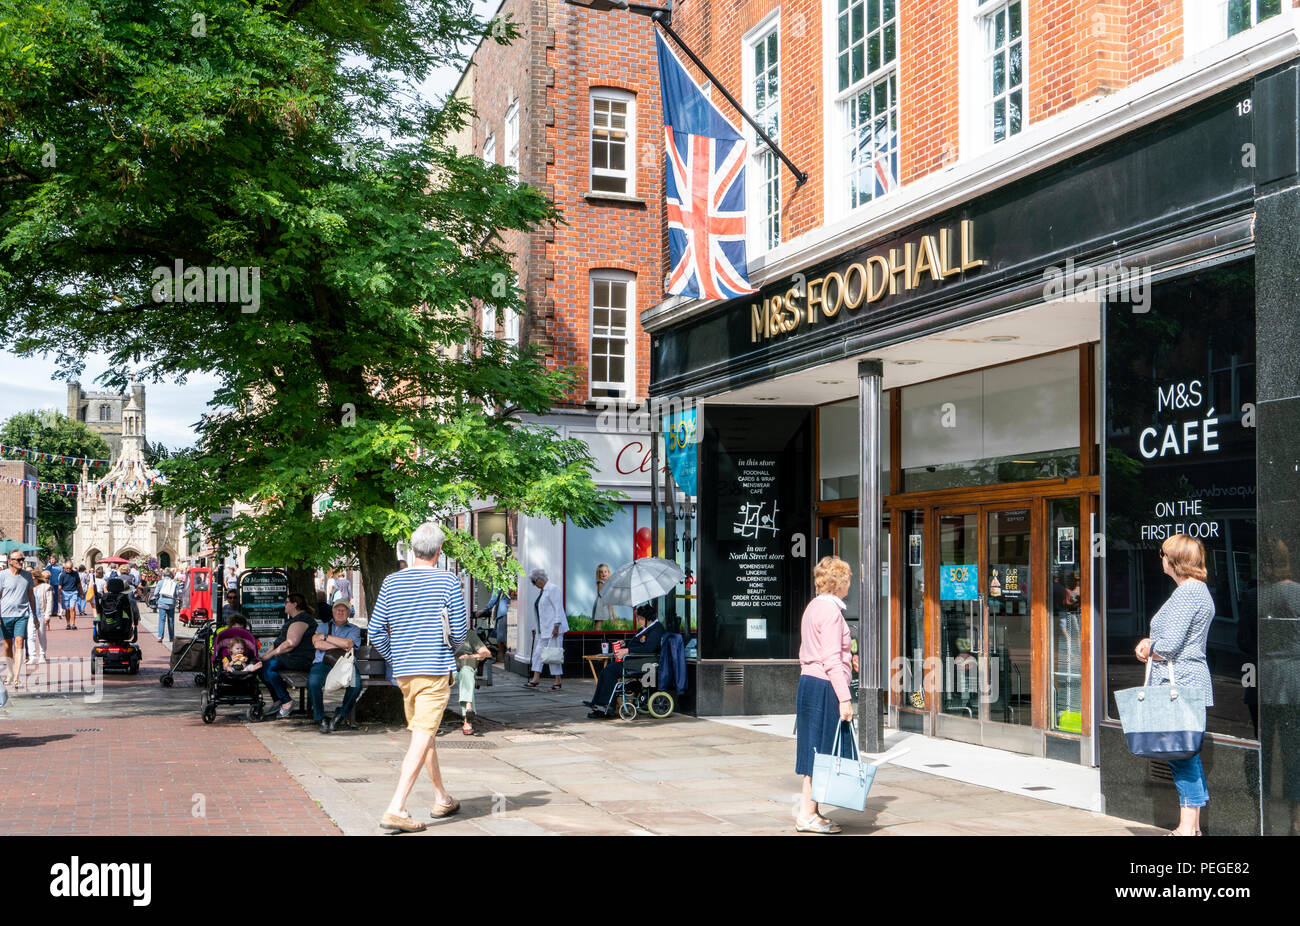 Marks & Spencer Food Hall, mens' fashion store and café in East Street, Chichester, West Sussex, a classic British high street business. Stock Photo